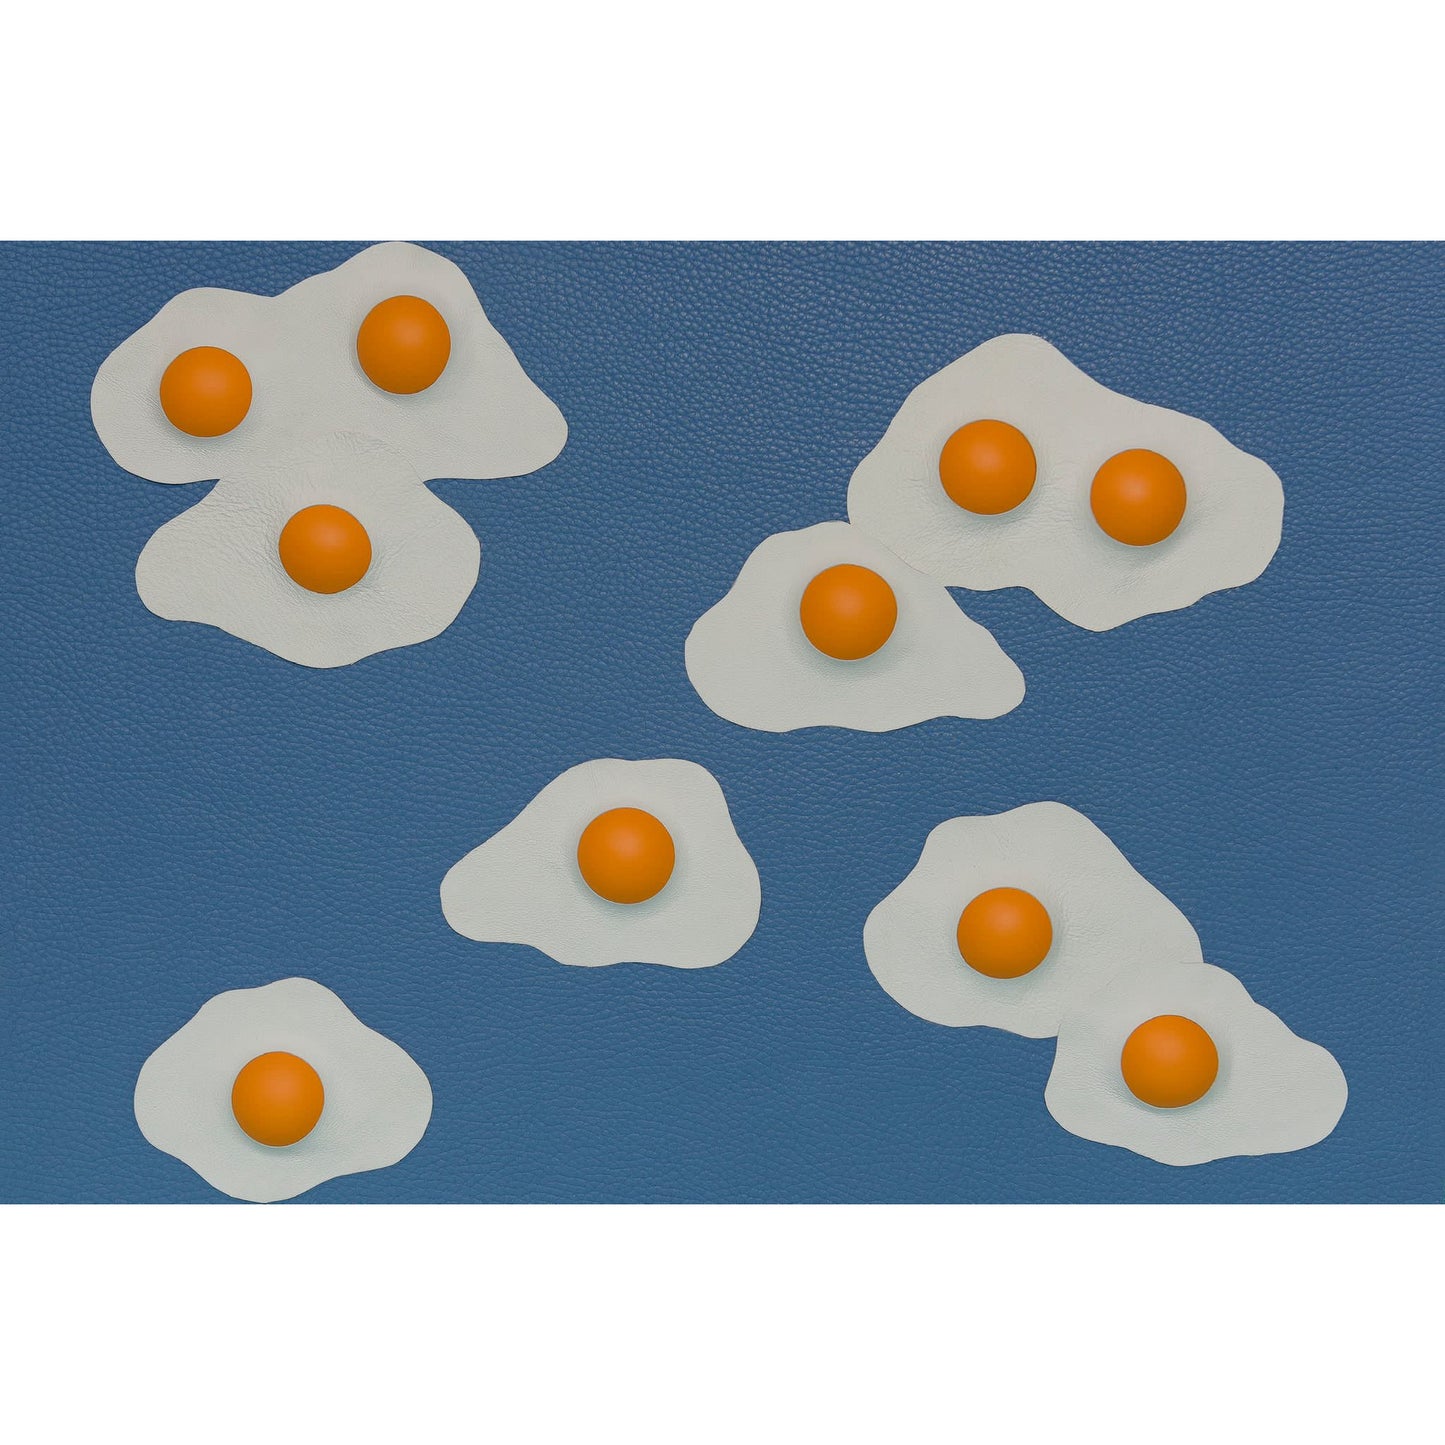 Valentine Huyghues Despointes - Sunny side clouds